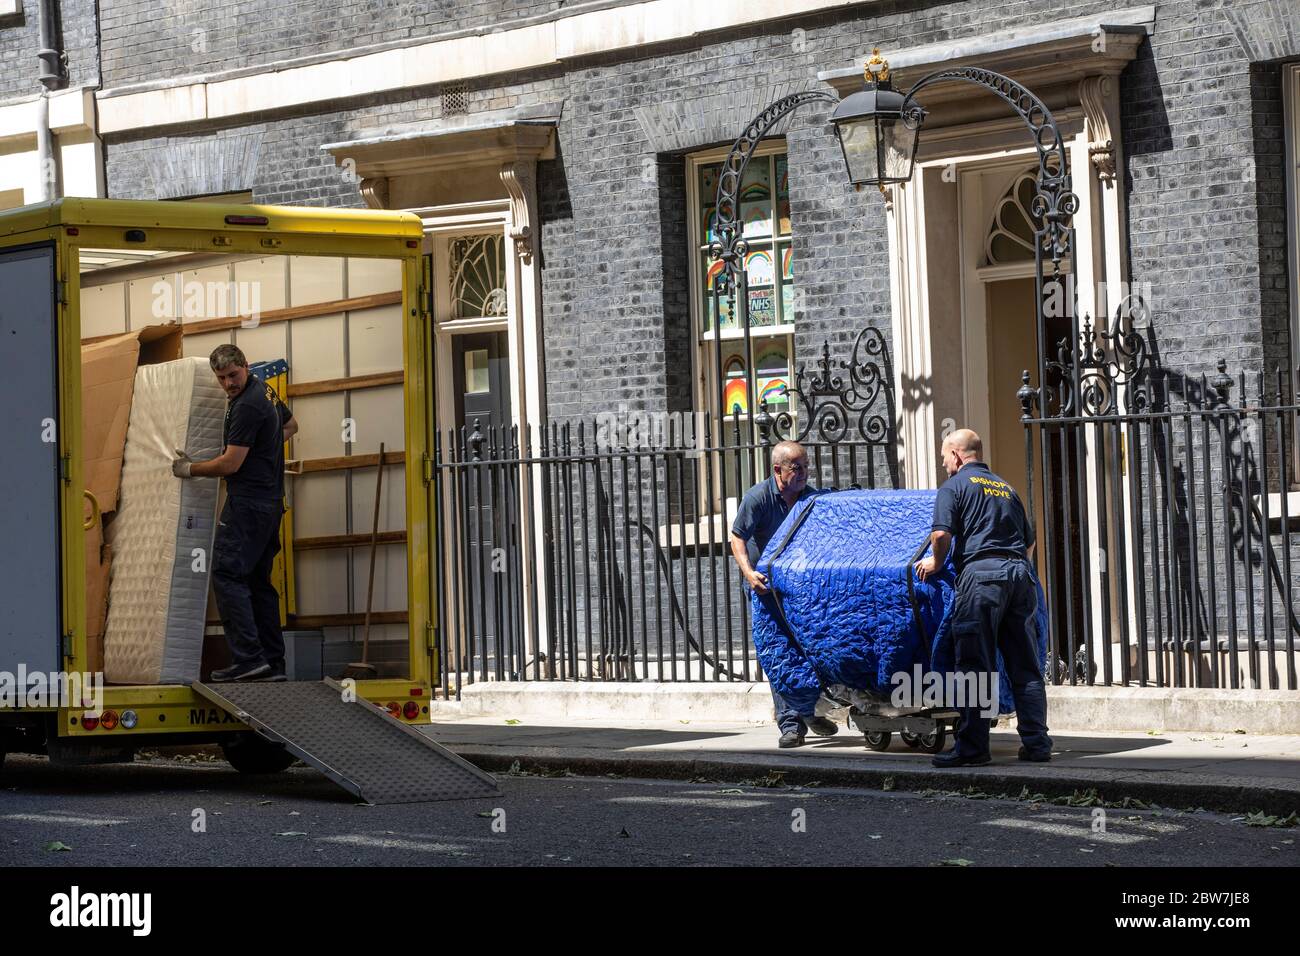 London, UK. 30th May, 2020. Romovals company move Chancellor of the Exchequer Rishi Sunak's belongings into Downing Street, London, UK 30th May 2020. Downing Street, Whitehall, London, England, UK Credit: Clickpics/Alamy Live News Stock Photo